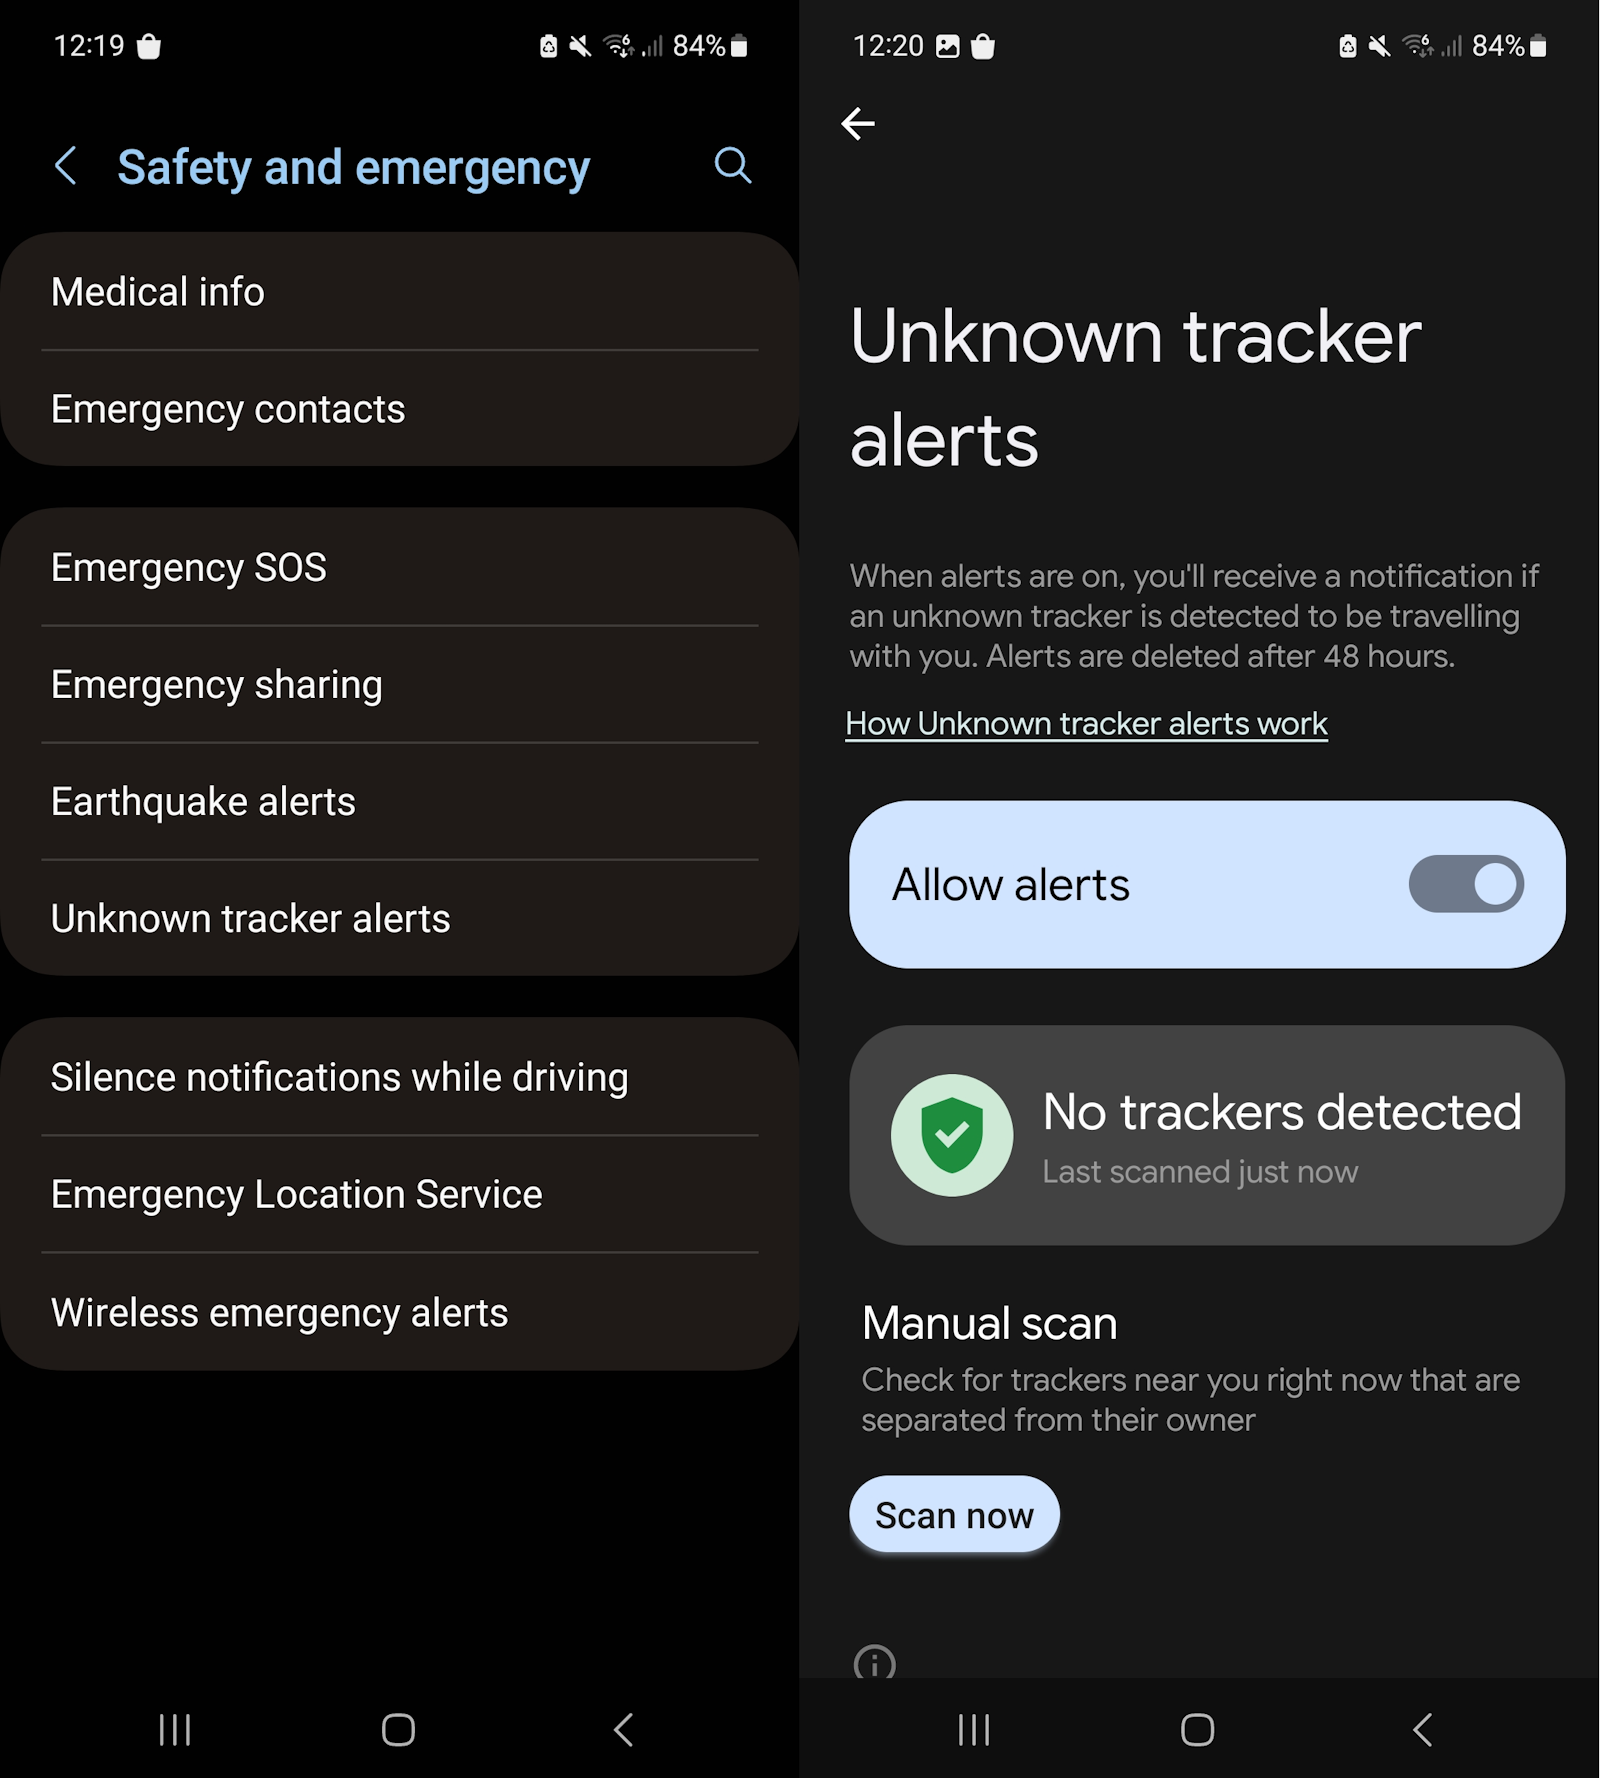 How to manually scan for unknown tracker devices in Android